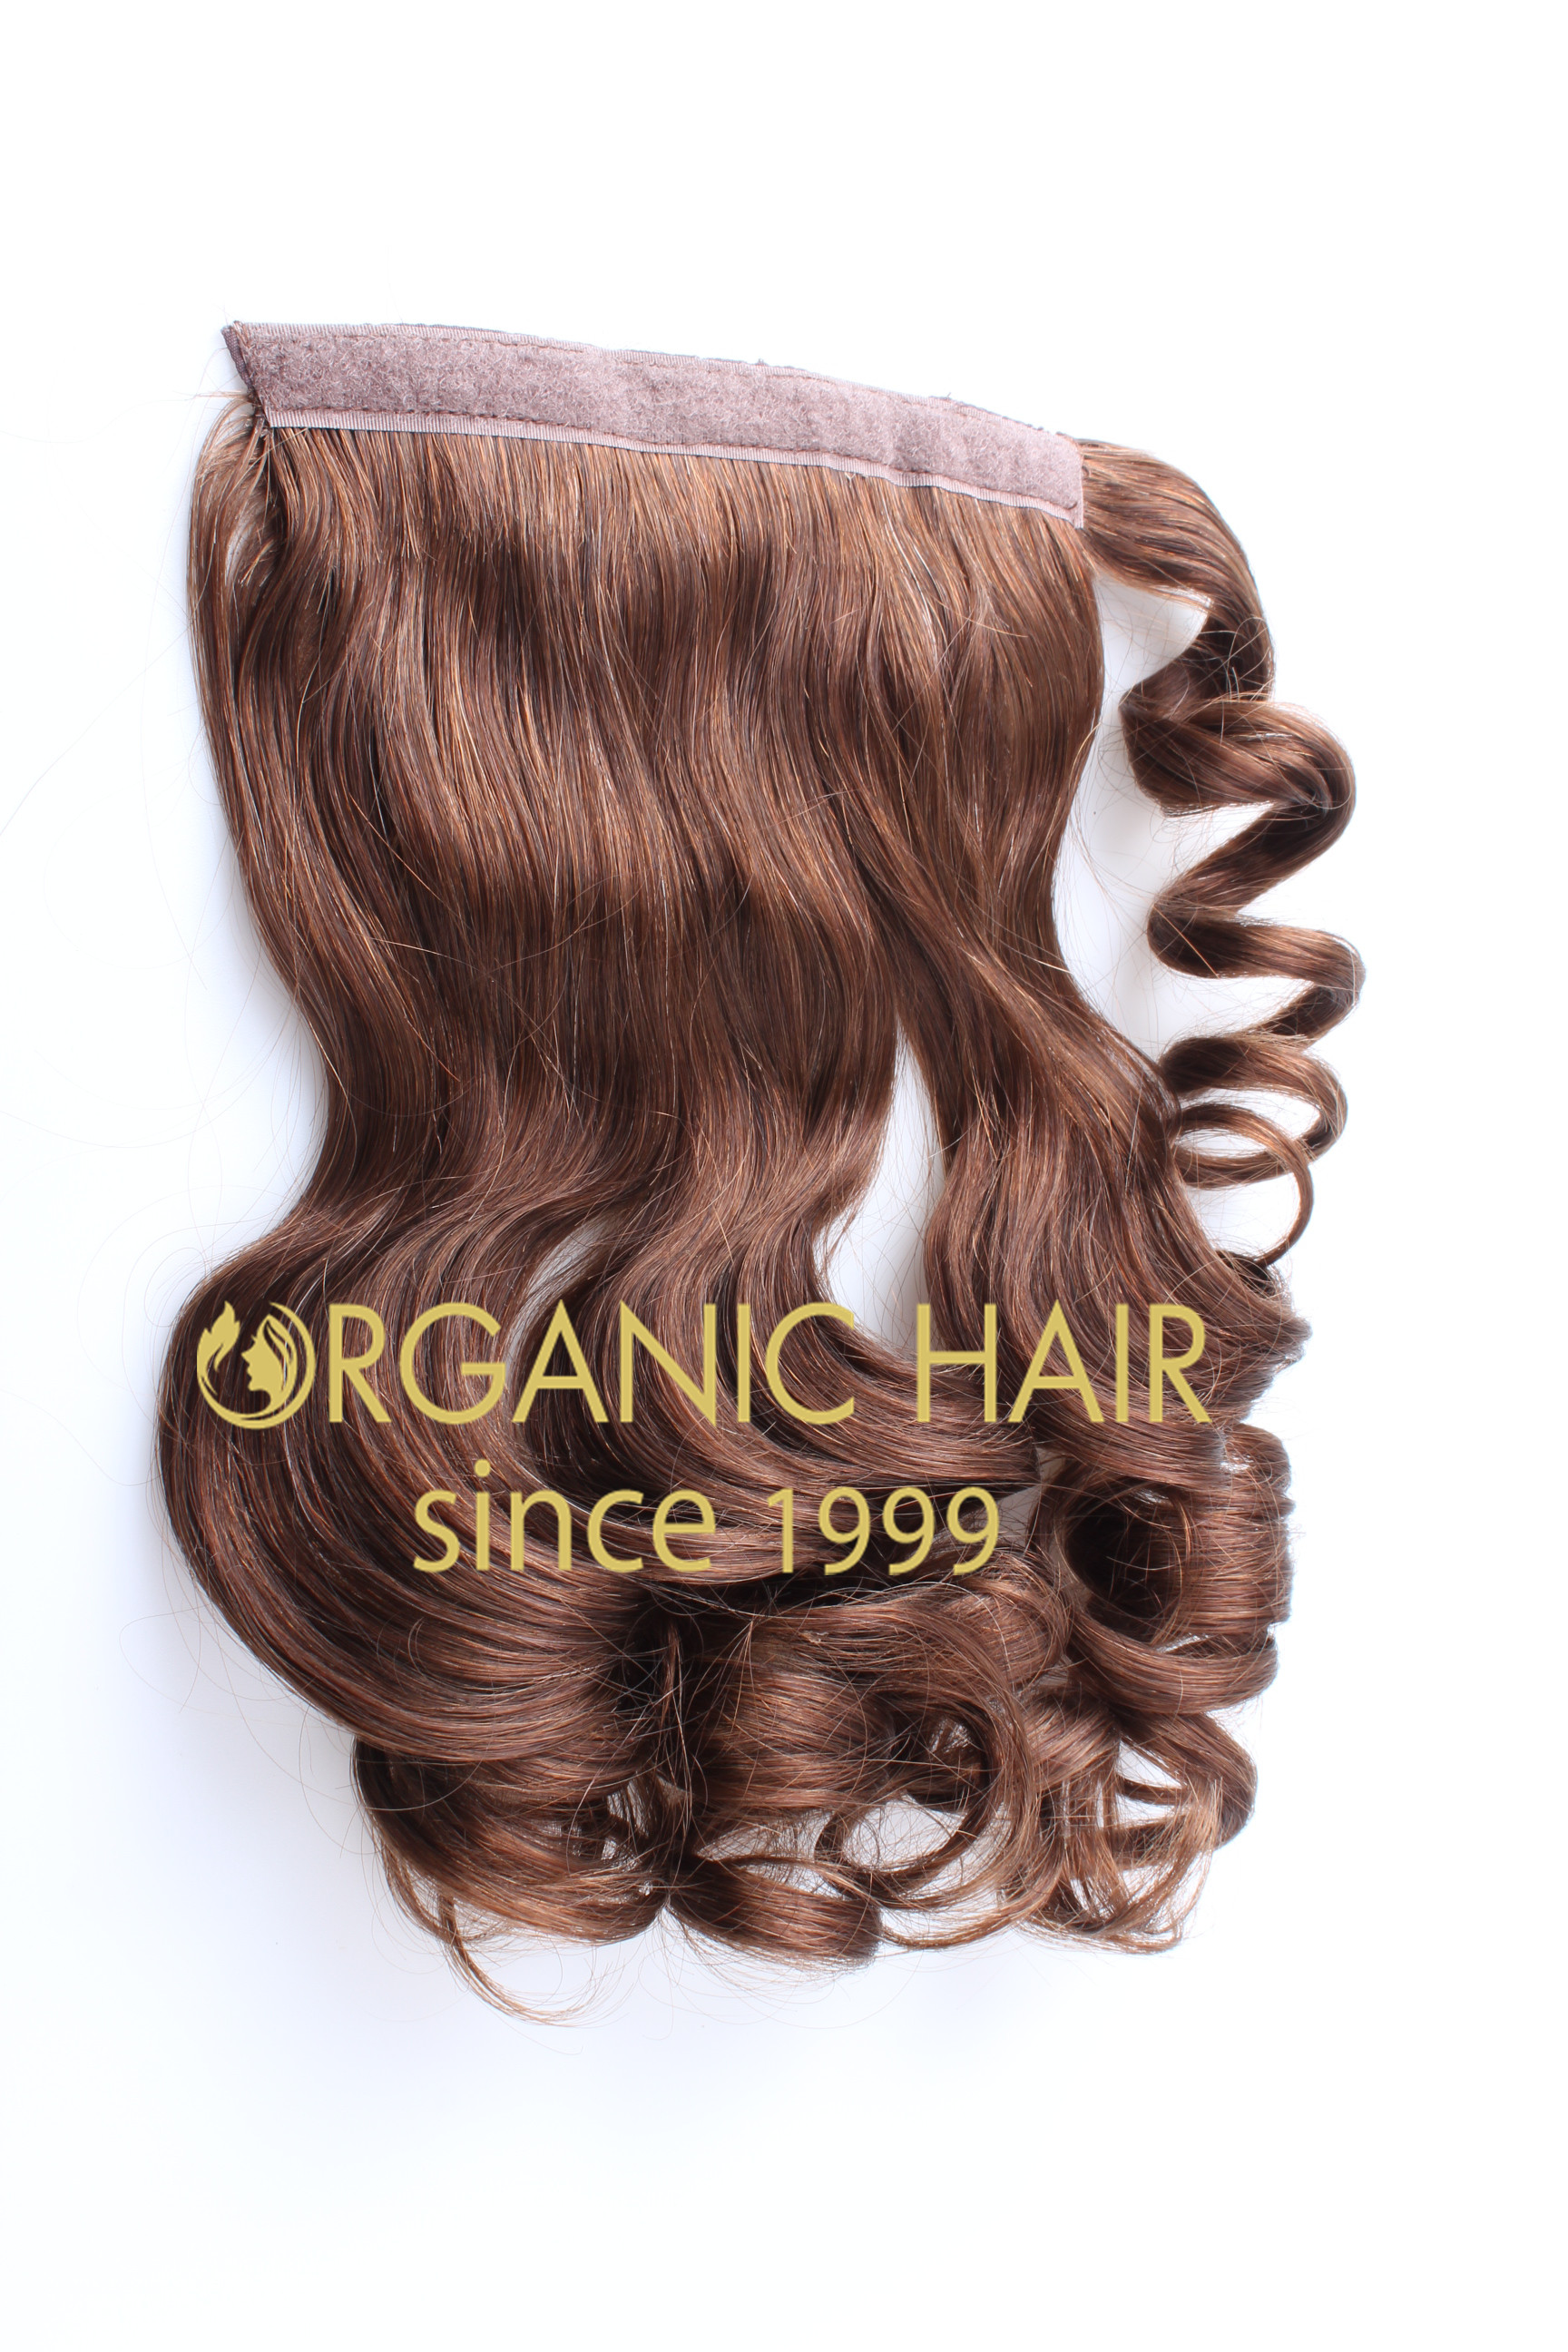 100%  raw human hair Pony tails extension at a wholesale price  A4 